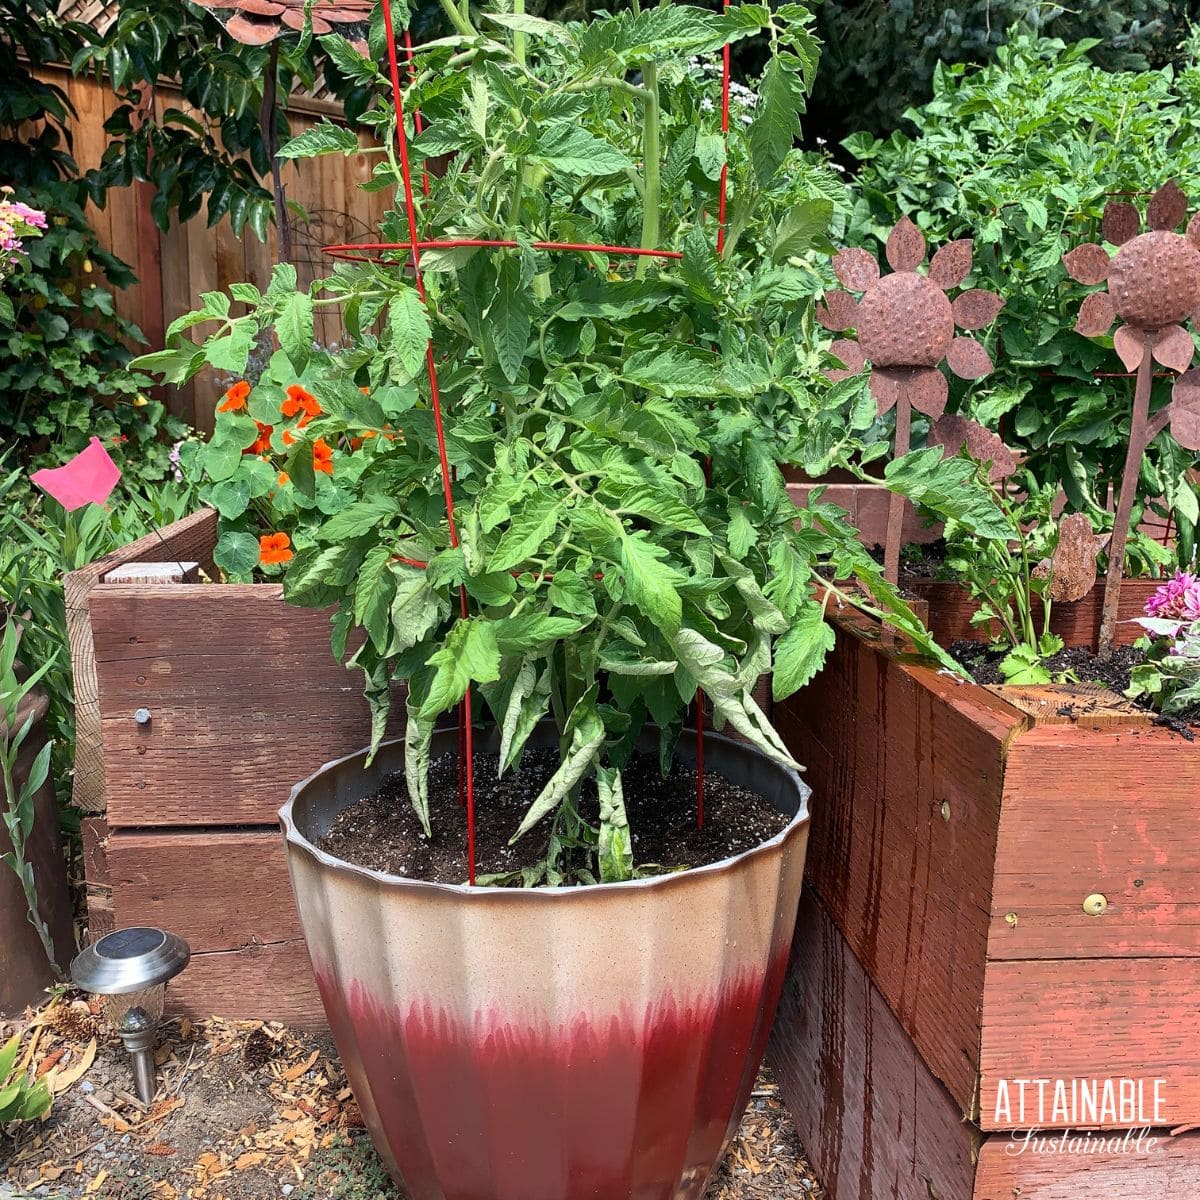 https://www.attainable-sustainable.net/wp-content/uploads/2021/02/TOMATOES-IN-CONTAINERS-1.jpg